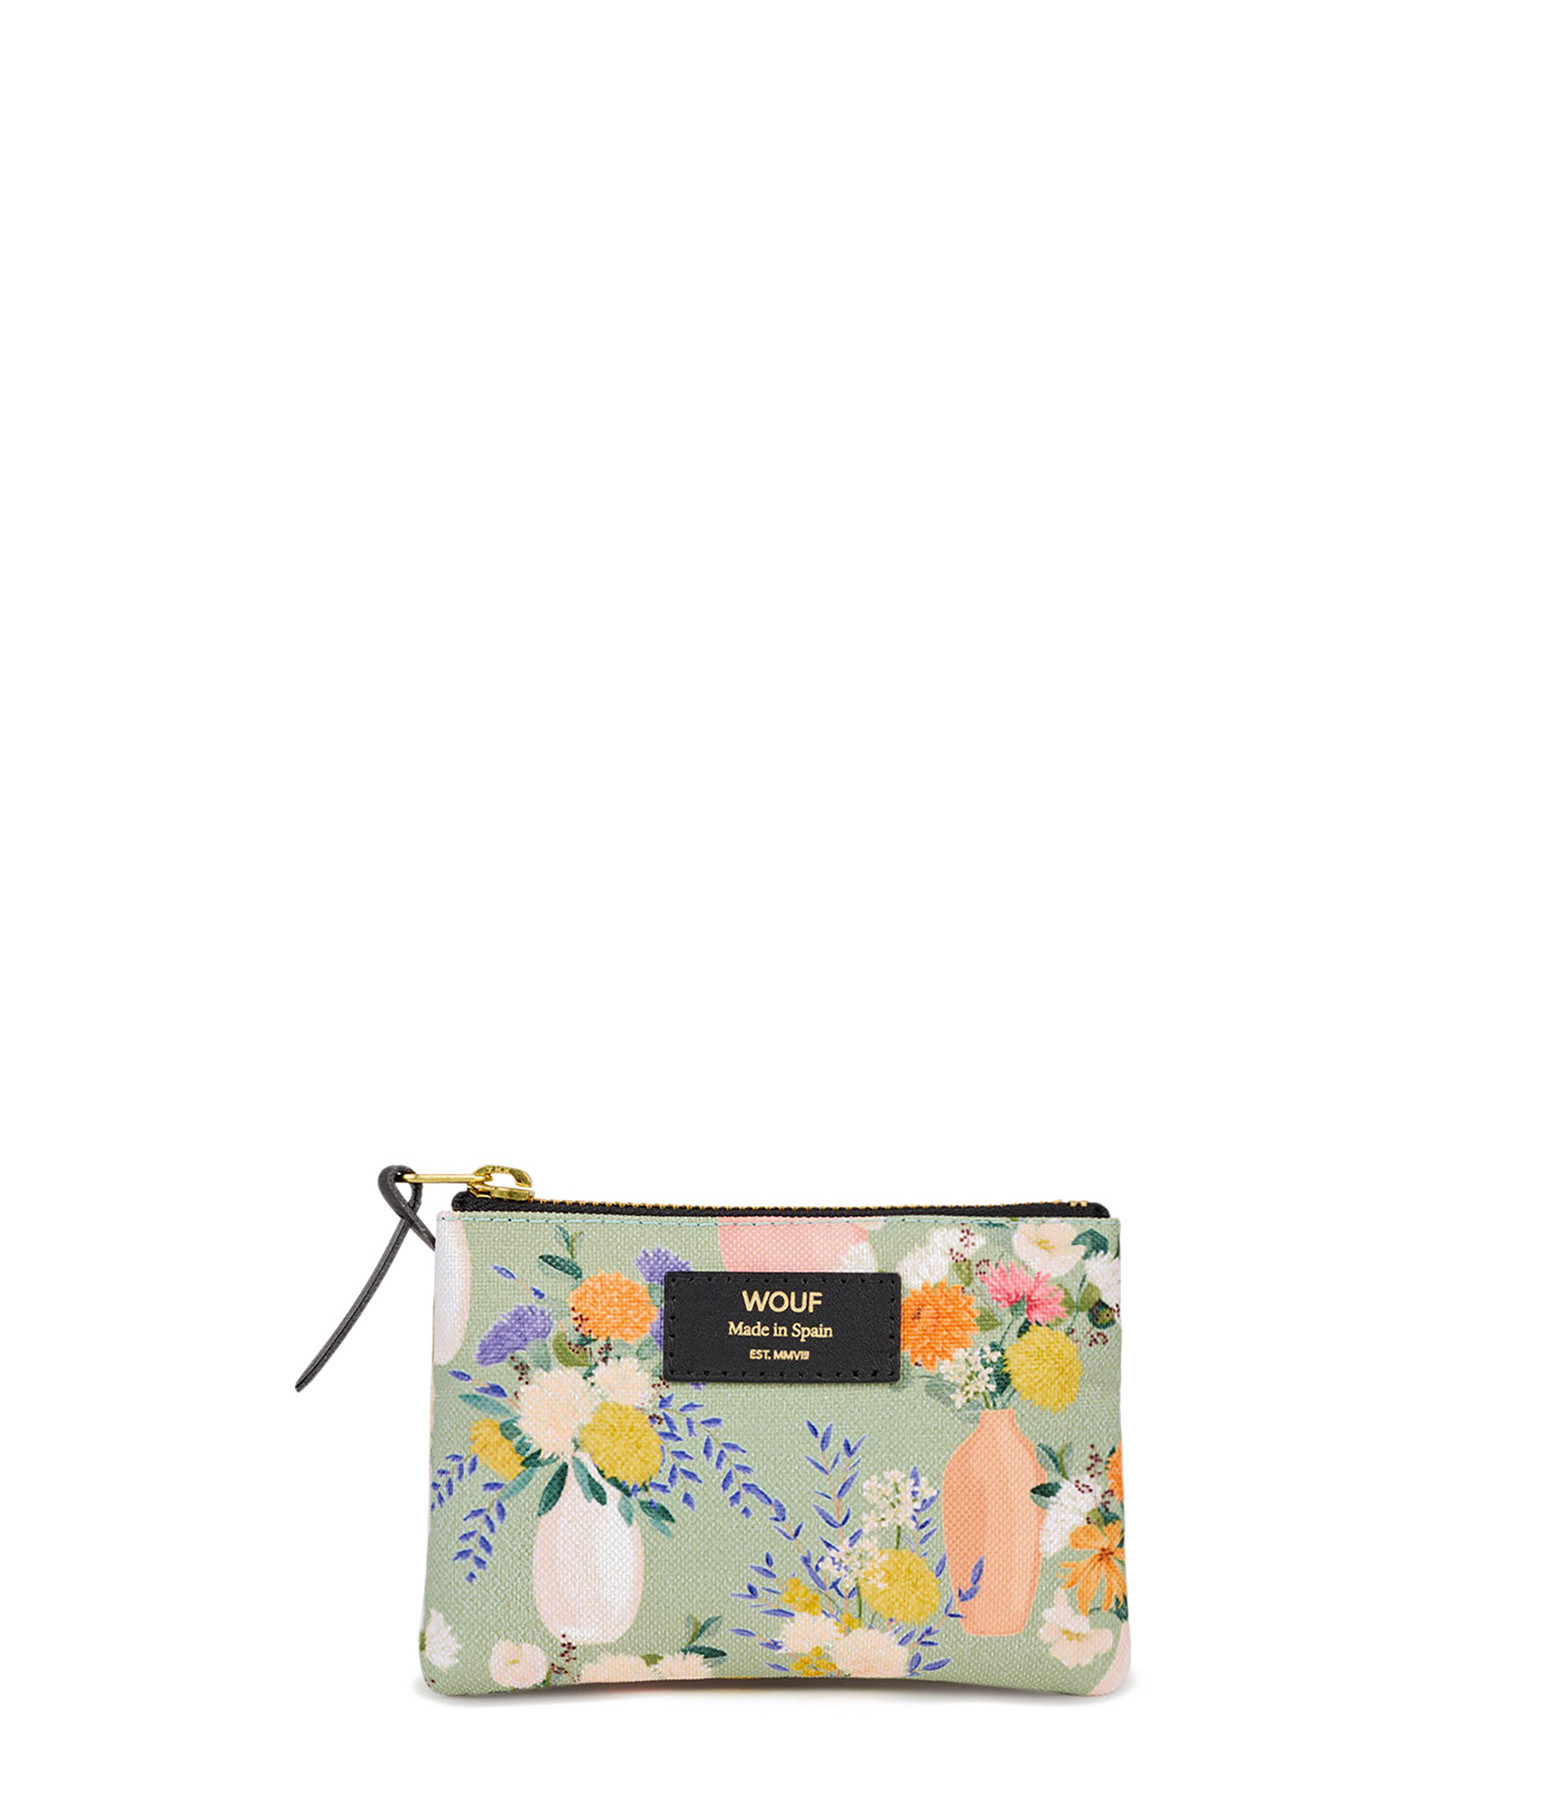 wouf-small-pouch-aida-front